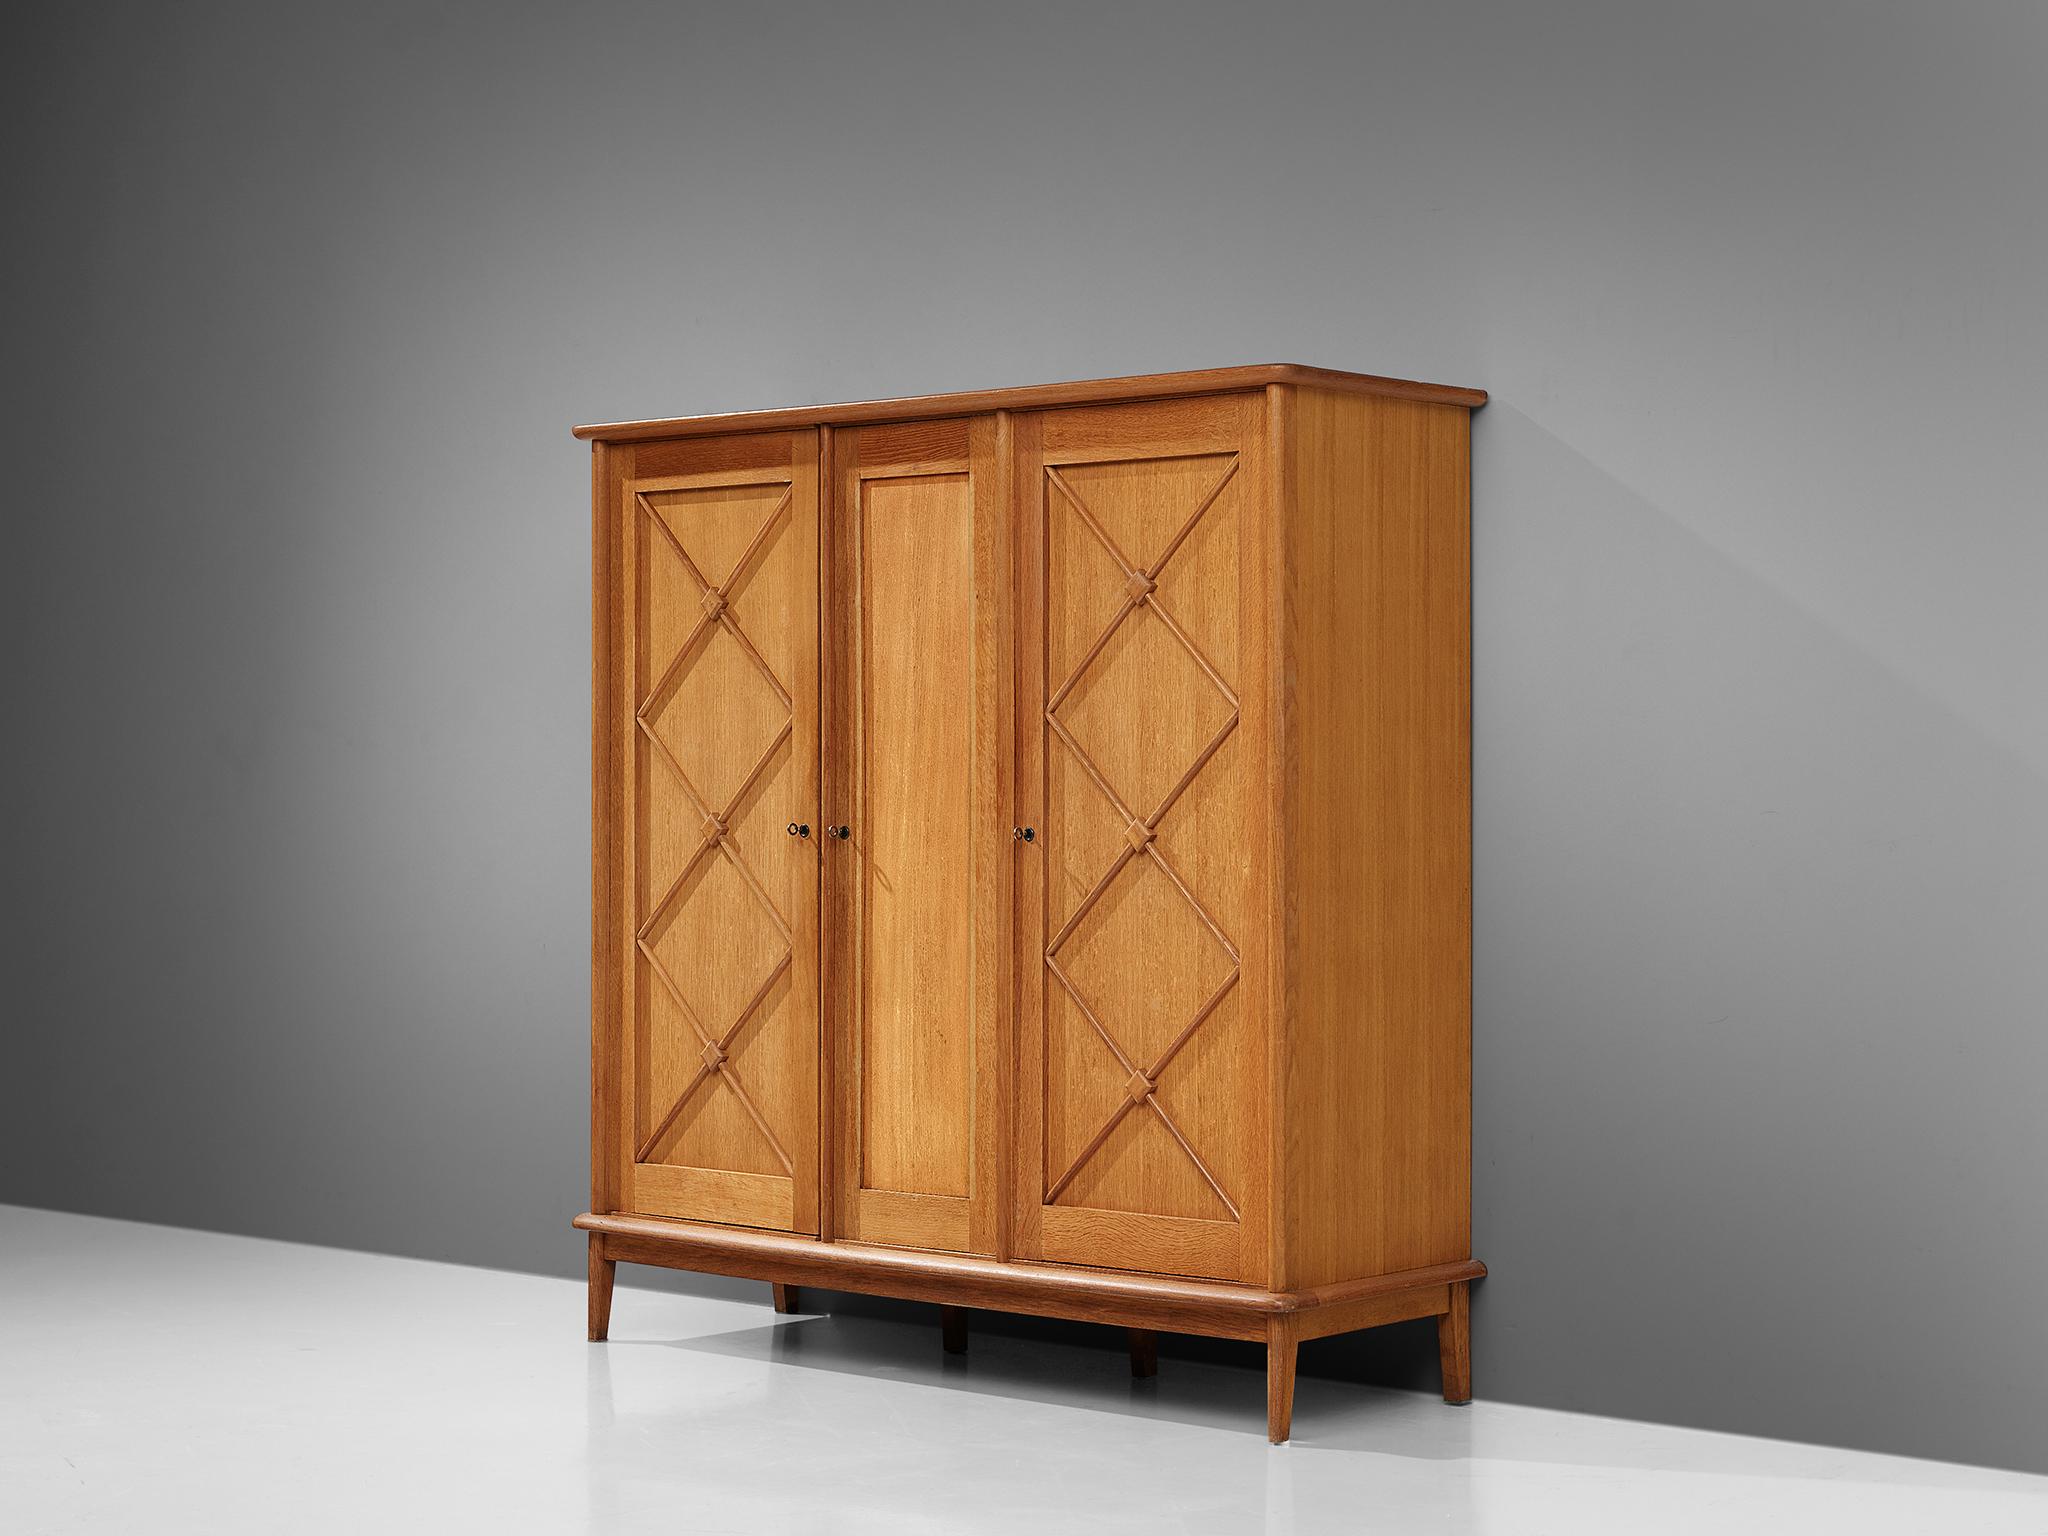 Large cabinet, oak, France, 1960s.

An elegant case piece in oak that features geometric details in the doors. The high board is lifted from the ground by slim, conical legs that give the solid looking body a more airy appearance. The cabinet